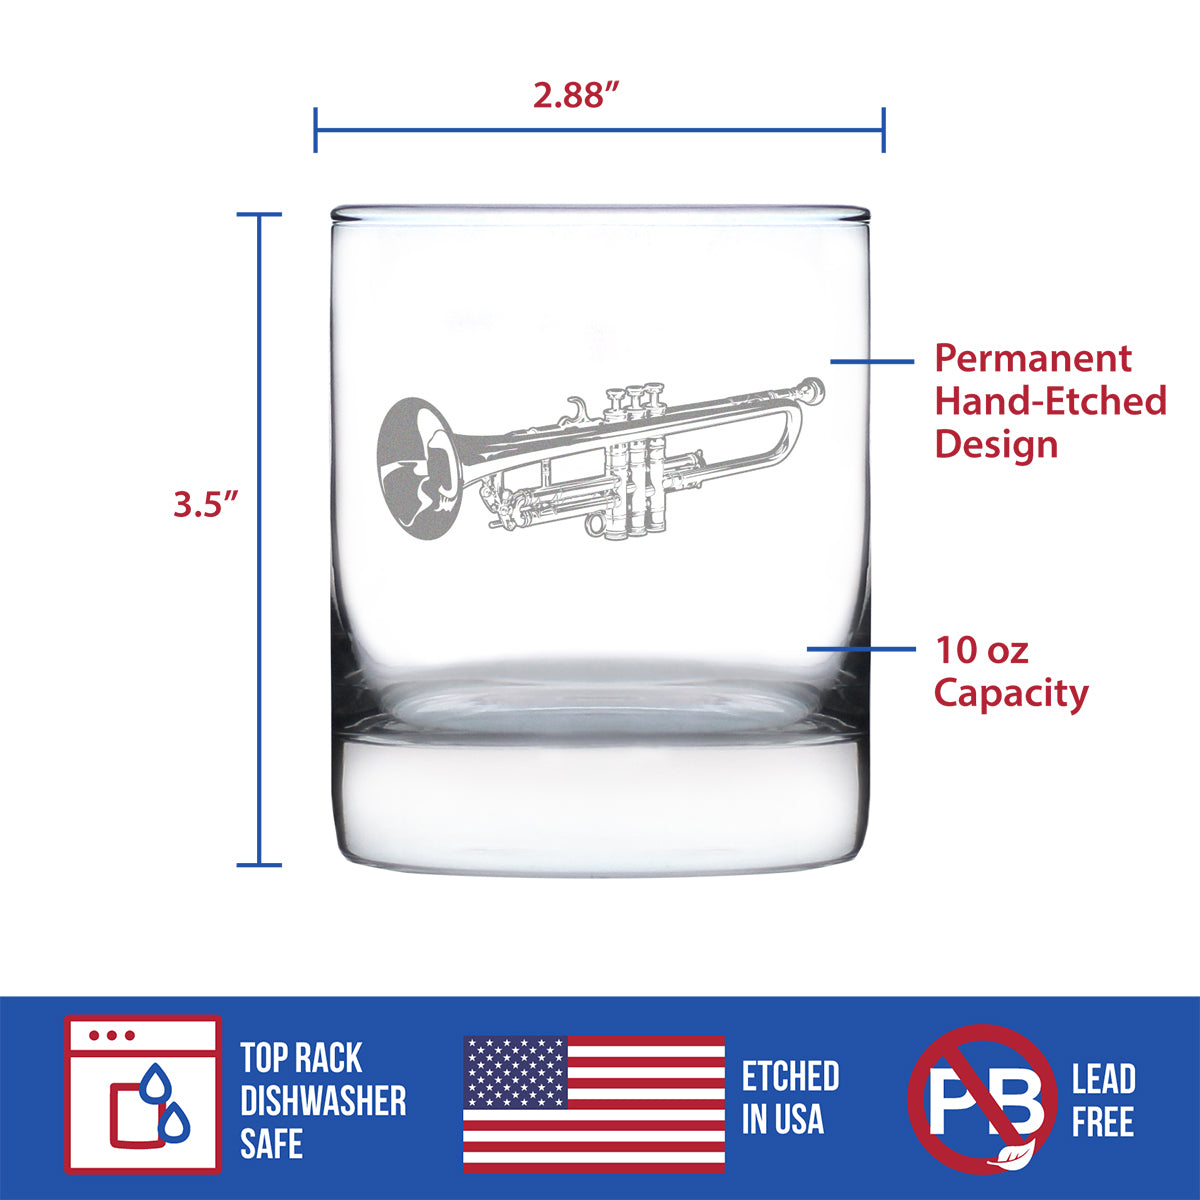 Trumpet Rocks Glass - Music Gifts for Trumpet Players, Teachers and Musical Accessories for Musicians that Play Trumpets - 10.25 Oz Glasses